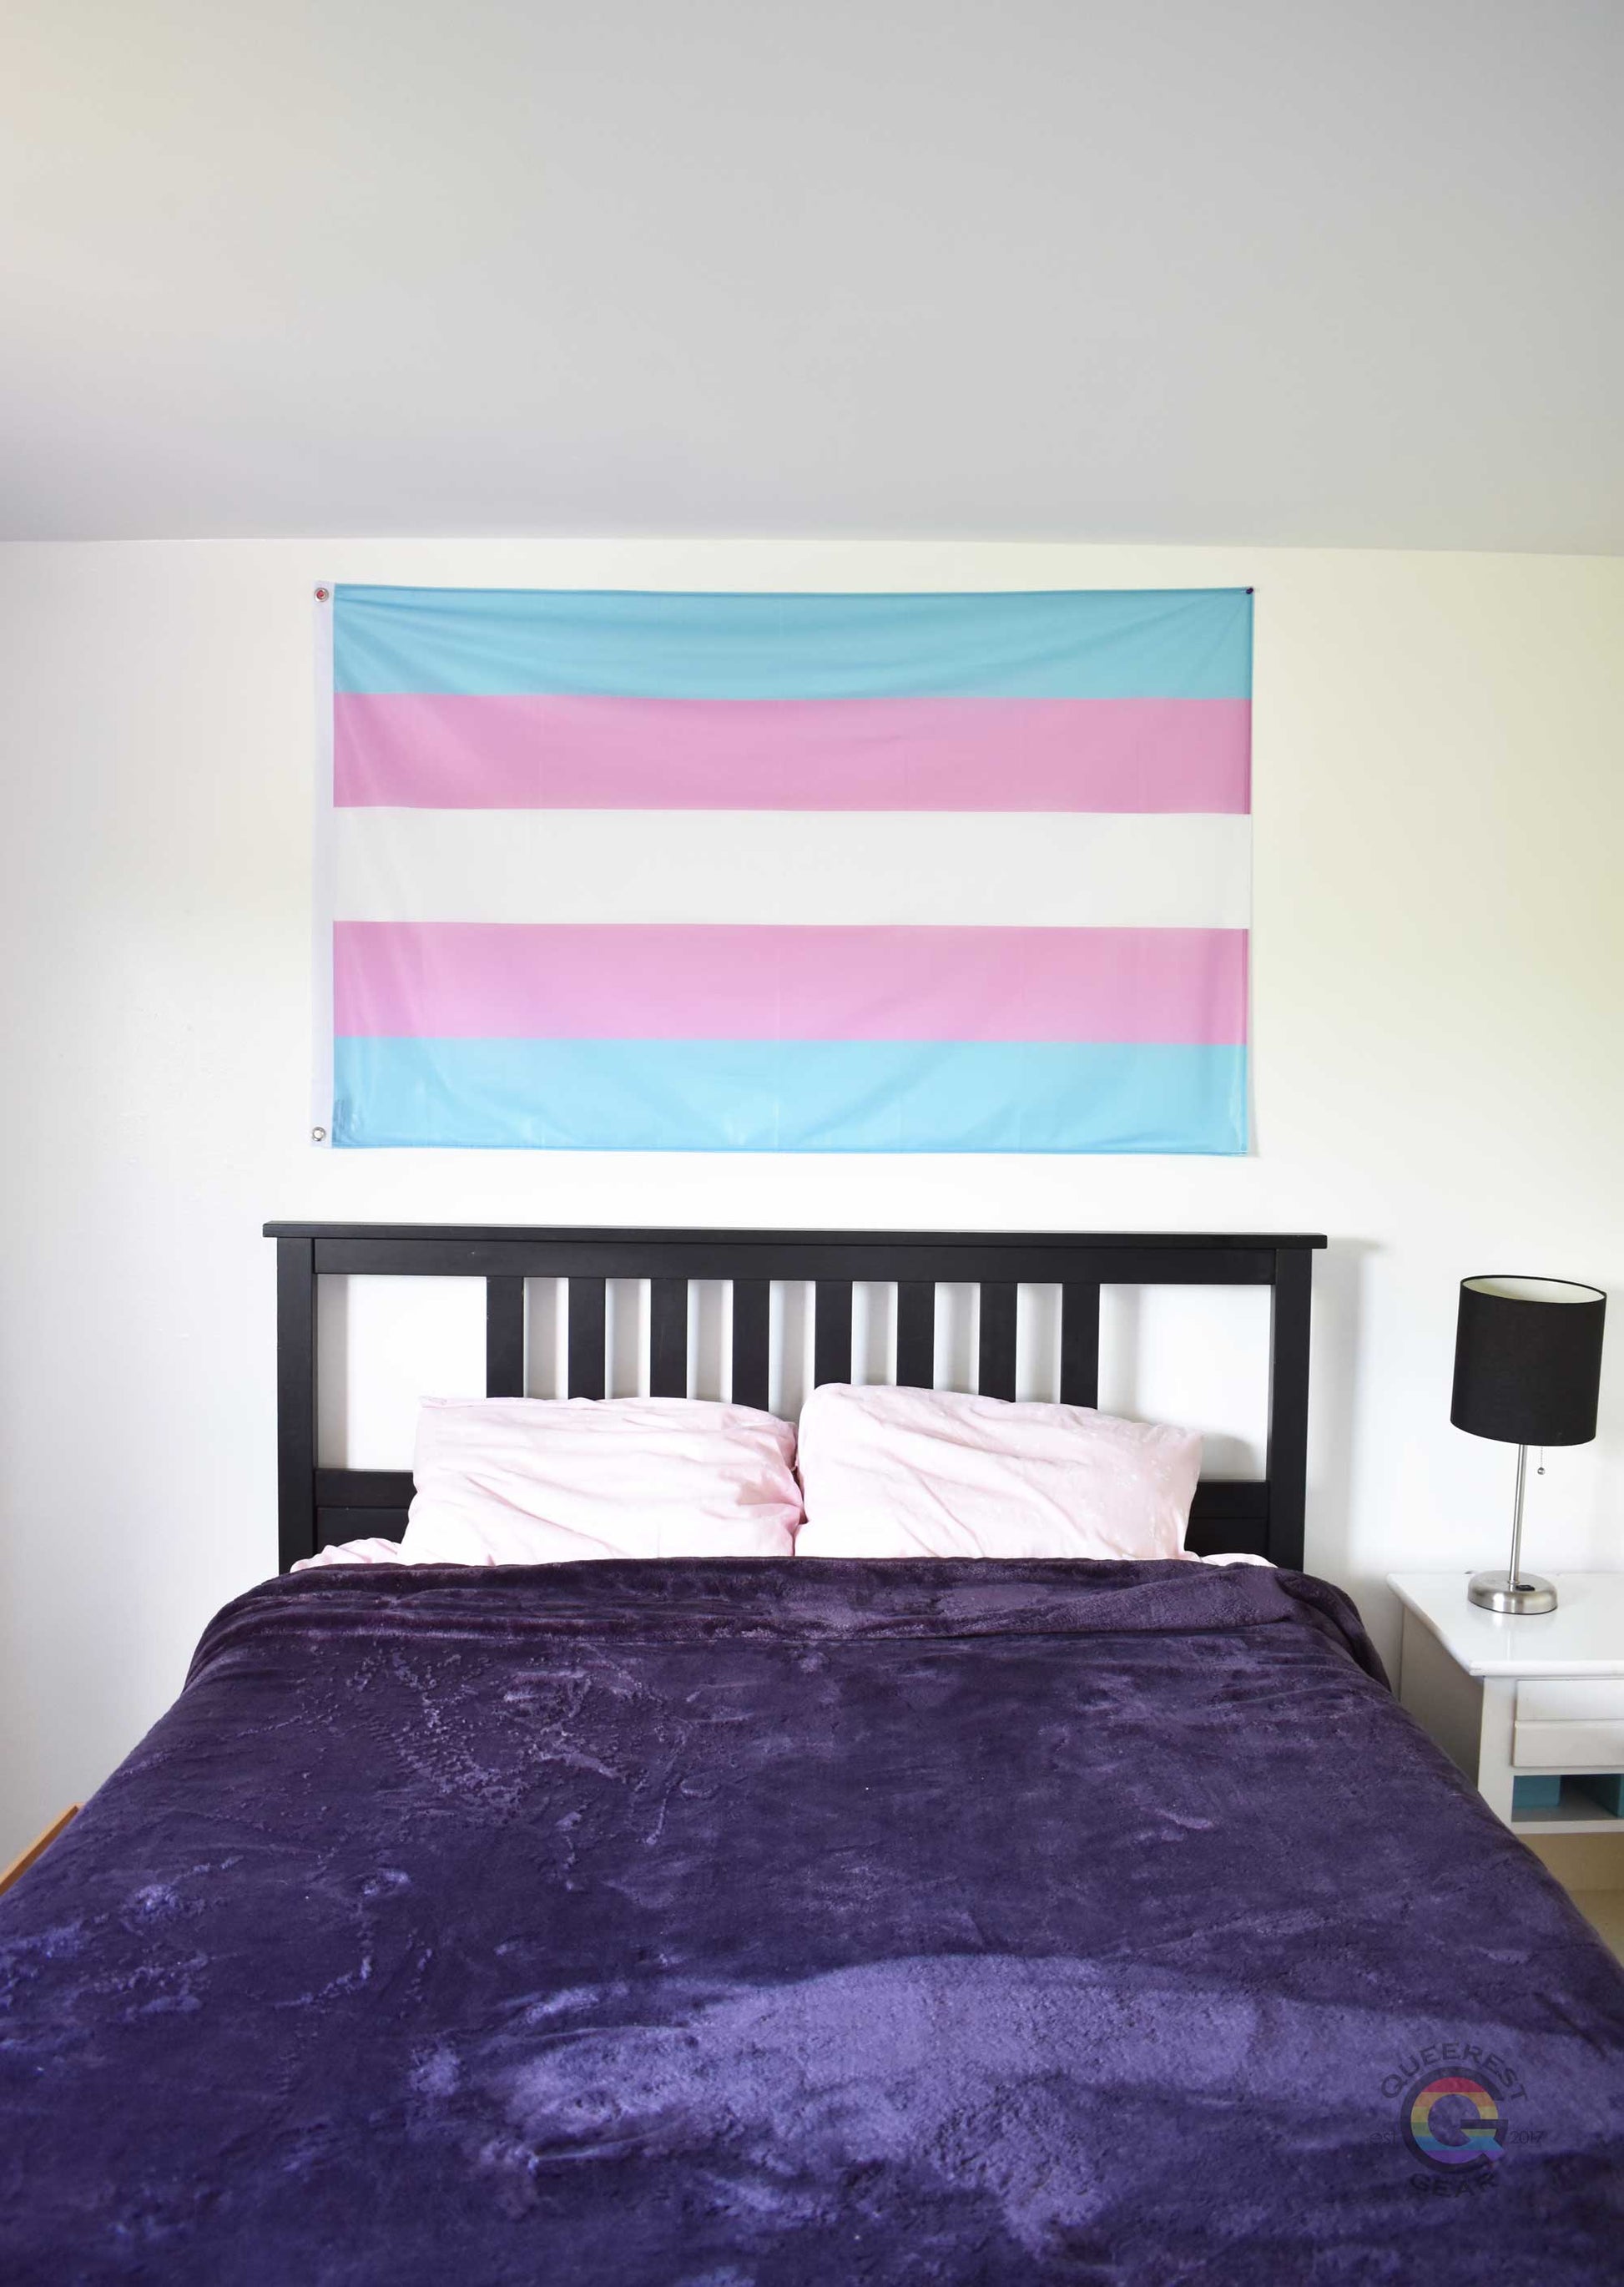 3’x5’ transgender pride flag hanging horizontally on the wall of a bedroom centered above a bed with a purple blanket